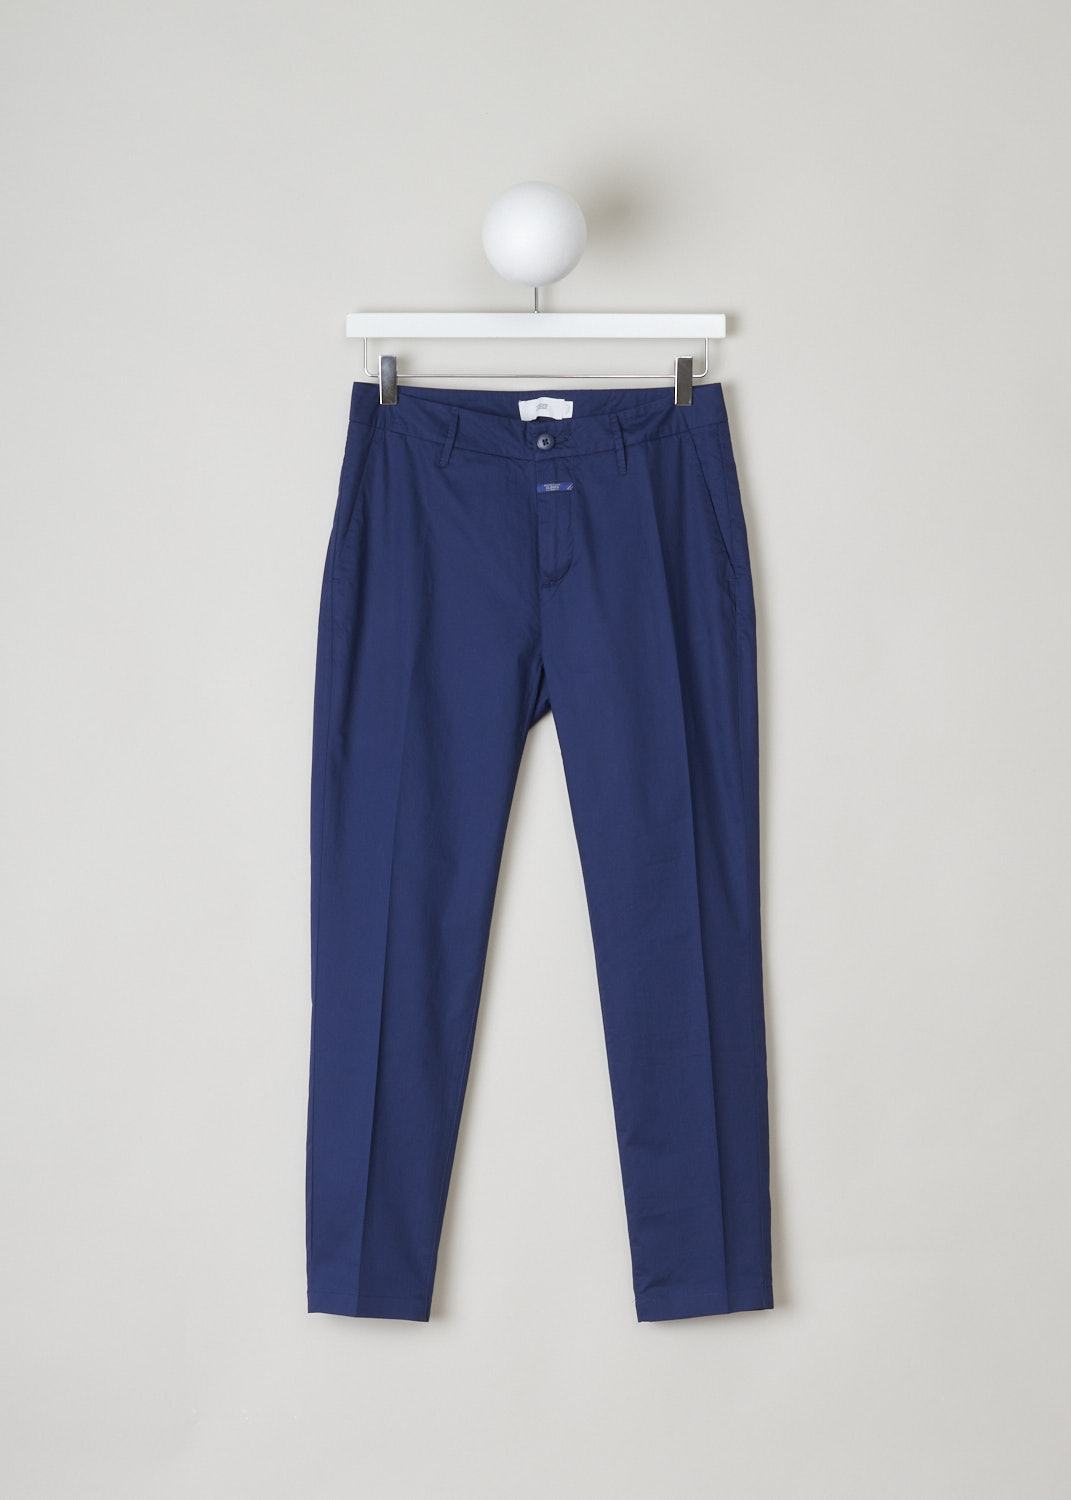 Closed, Indigo blue chino, jack_C91012_25E_22_558, blue, front, Flat front chino made solely out of cotton and coloured to a lovely shade of indigo blue. Four pockets in total with two forward slanted pockets on the front, and two welt pockets on the backside.  